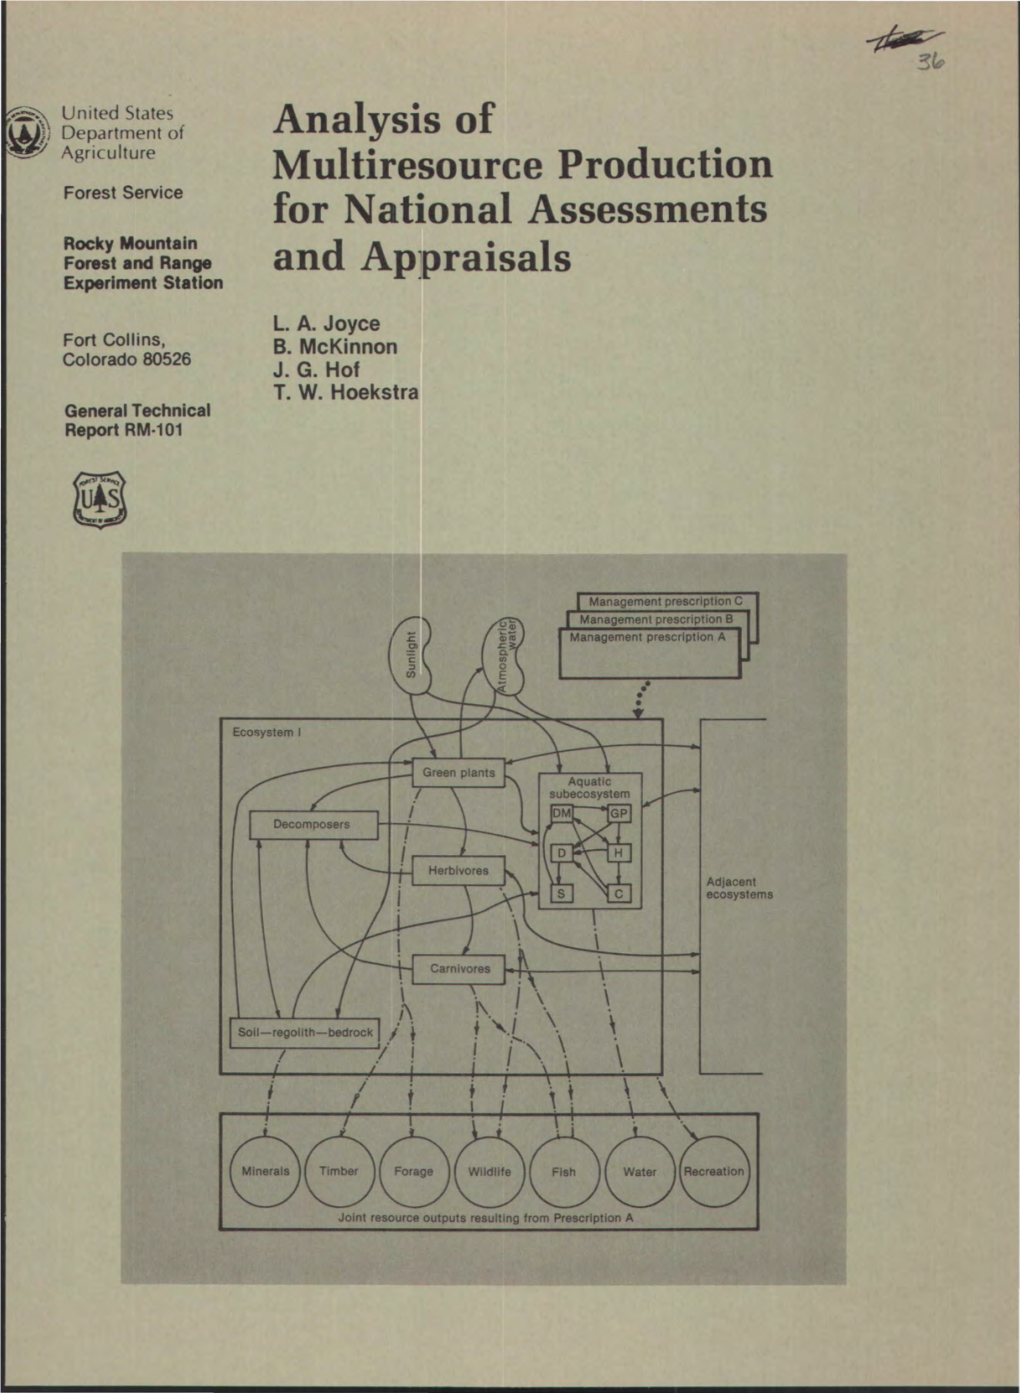 Analysis of Multiresource Production for National Assessments and Appraisals